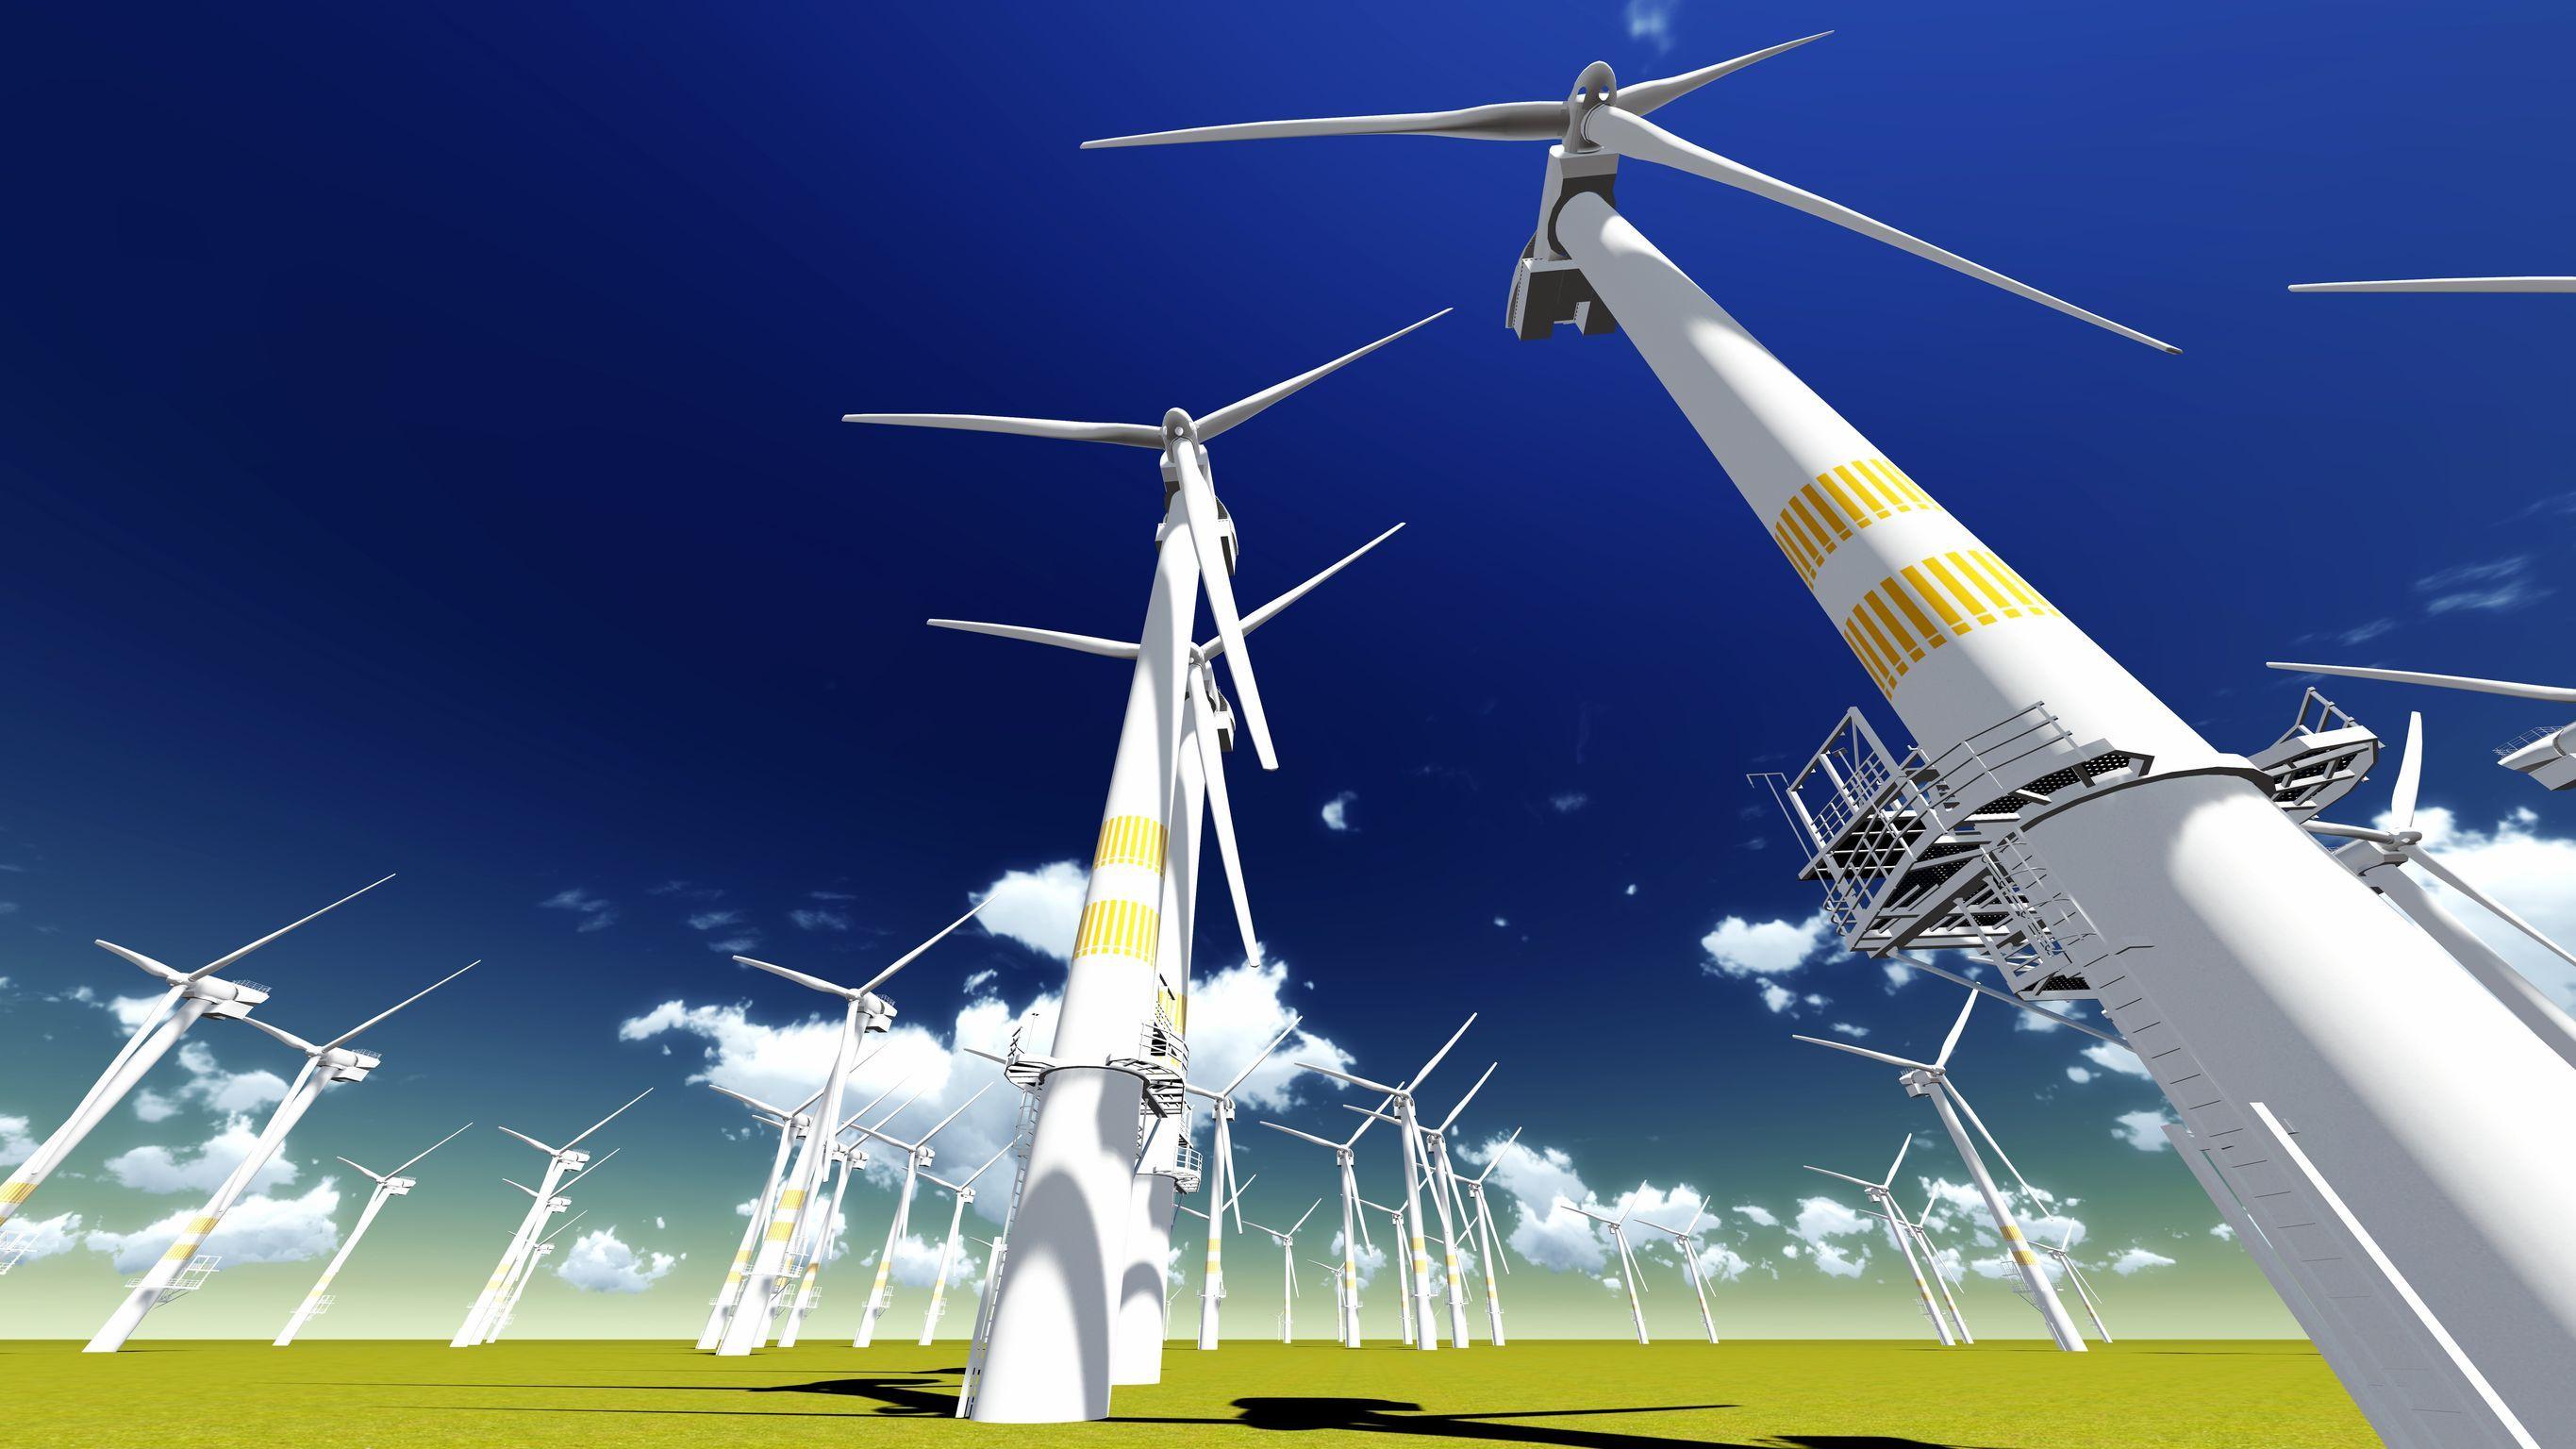 1000 Vertical Axis Wind Turbine Stock Photos Pictures  RoyaltyFree  Images  iStock  Horizontal axis wind turbine Windmill Wind power